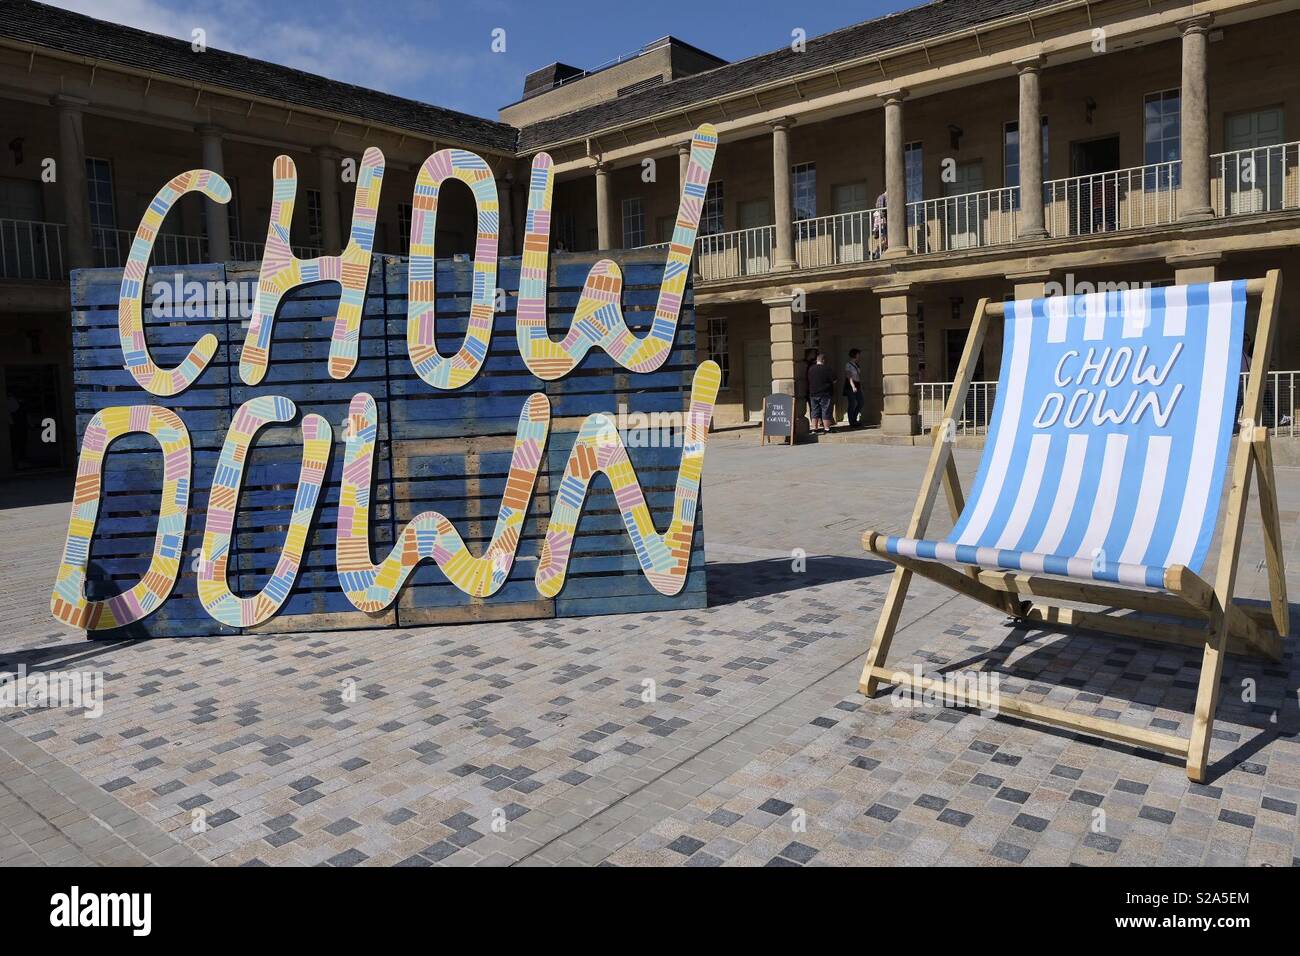 Sommer Wetter am Chow down Food Festival am Stück Hall, Halifax, West Yorkshire. Stockfoto